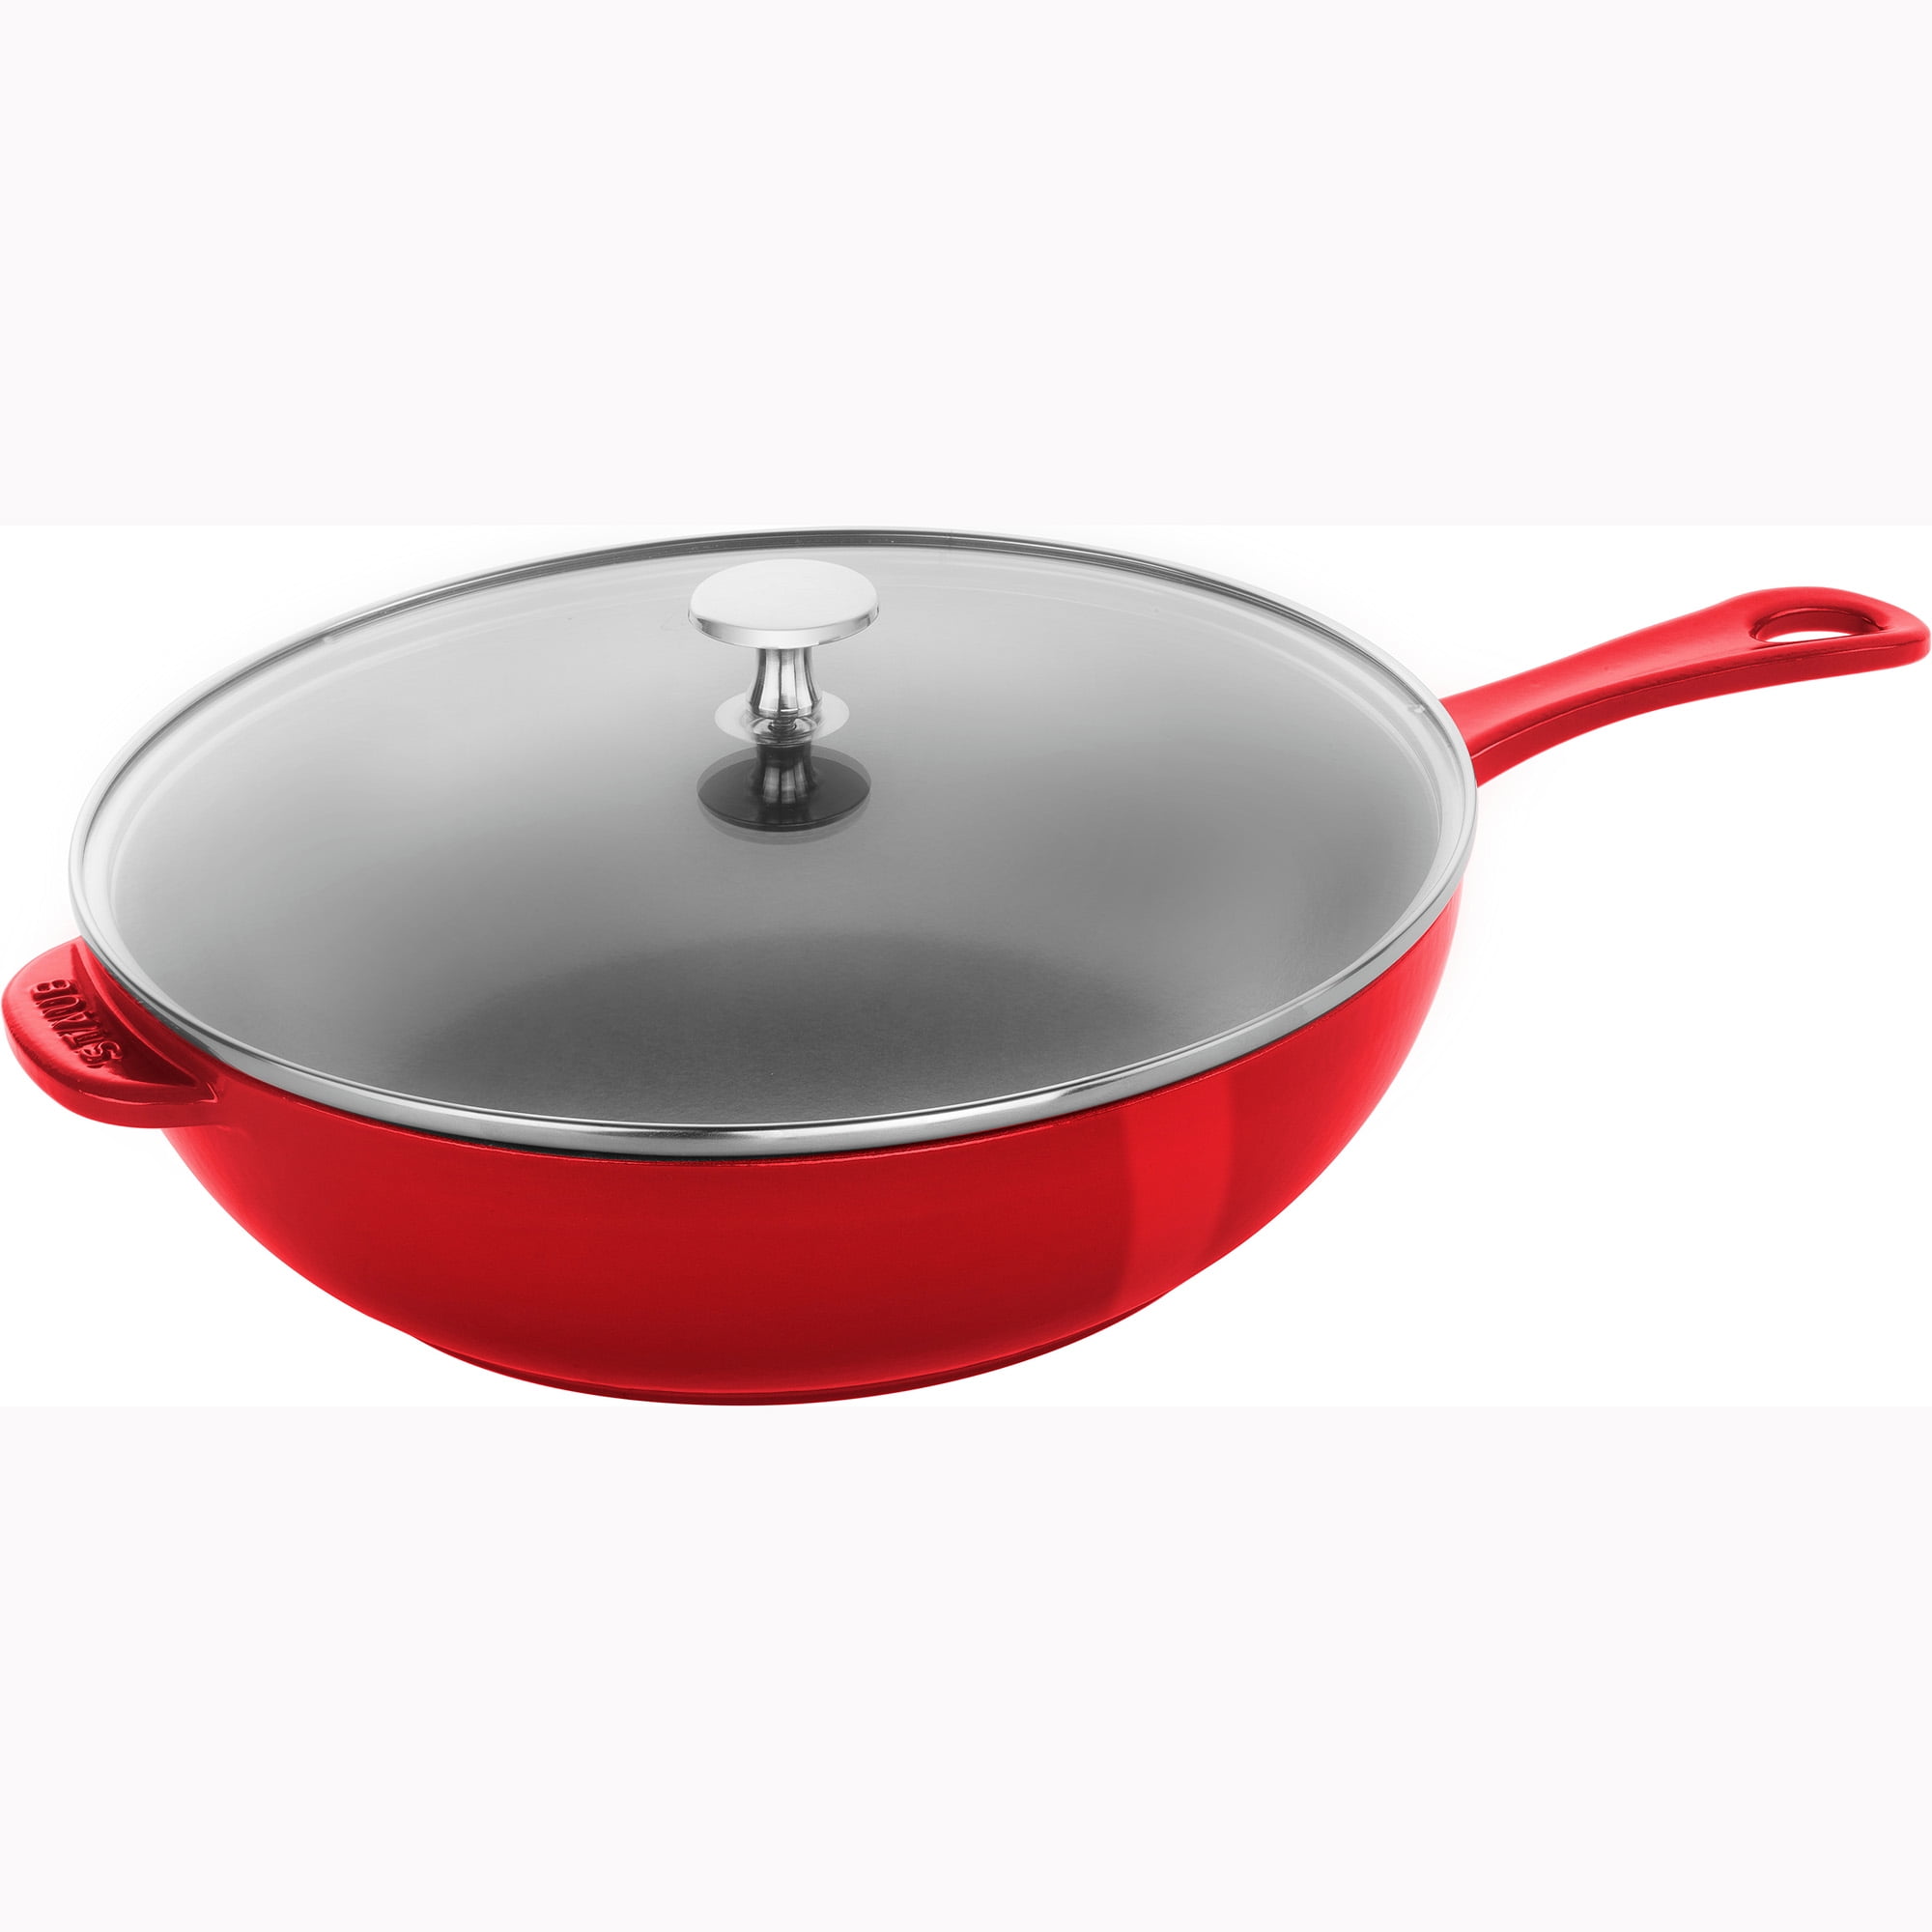 STAUB Cast Iron Pan with Lid, Staub Cast Iron Daily Pan, Dutch Oven,  2.9-quart, serves 2-3, Made in France, Cherry 